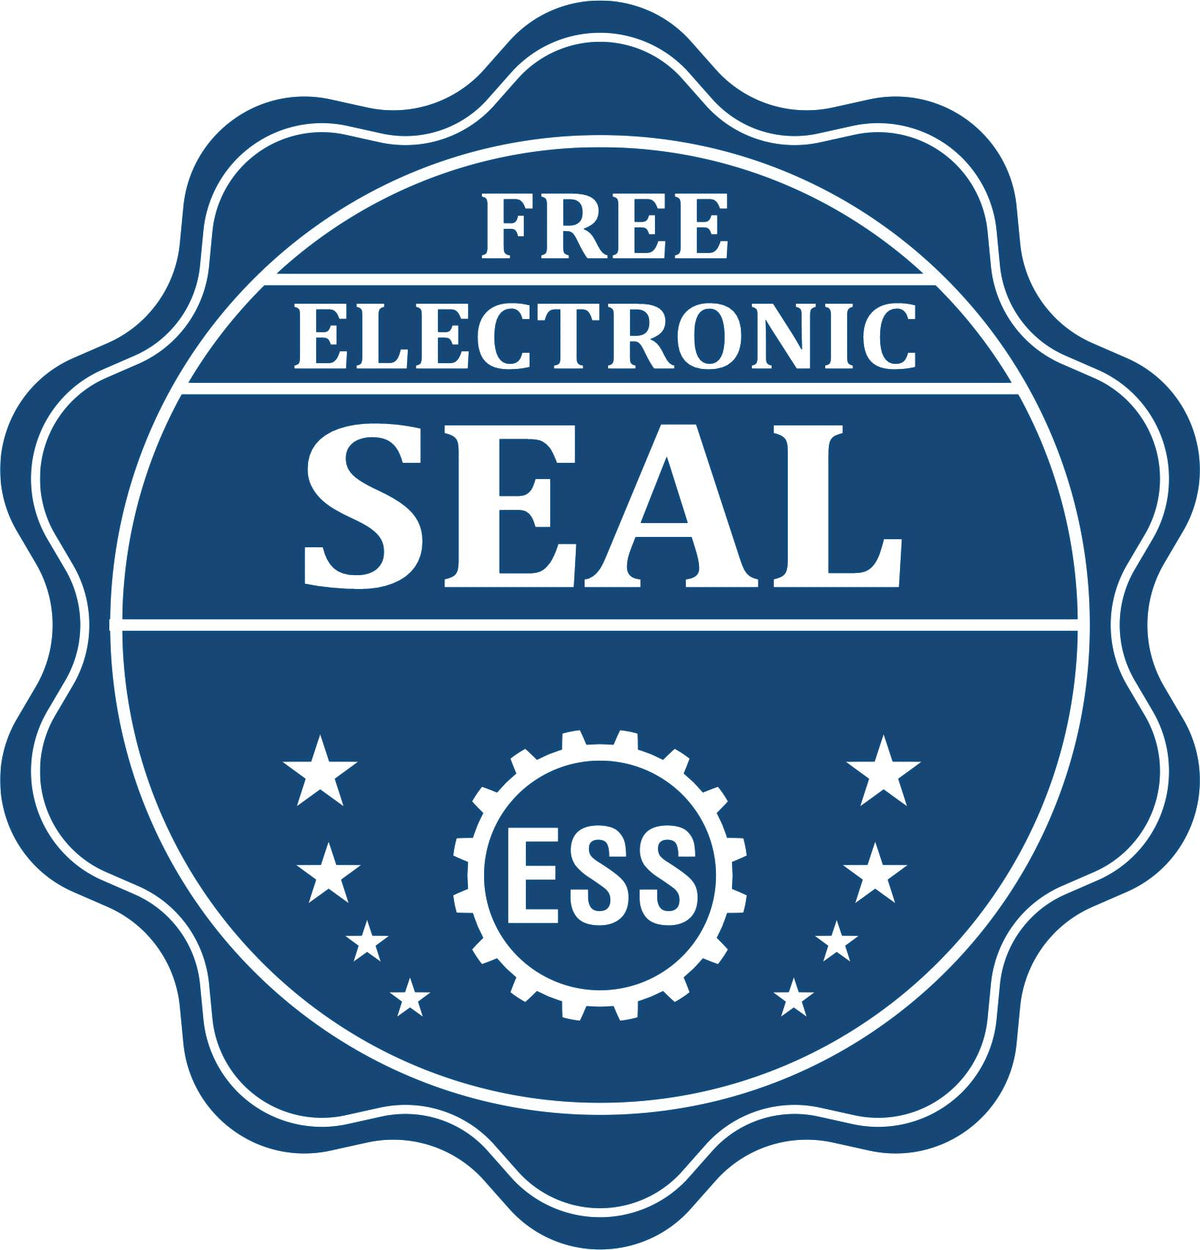 A badge showing a free electronic seal for the Slim Pre-Inked Rhode Island Architect Seal Stamp with stars and the ESS gear on the emblem.